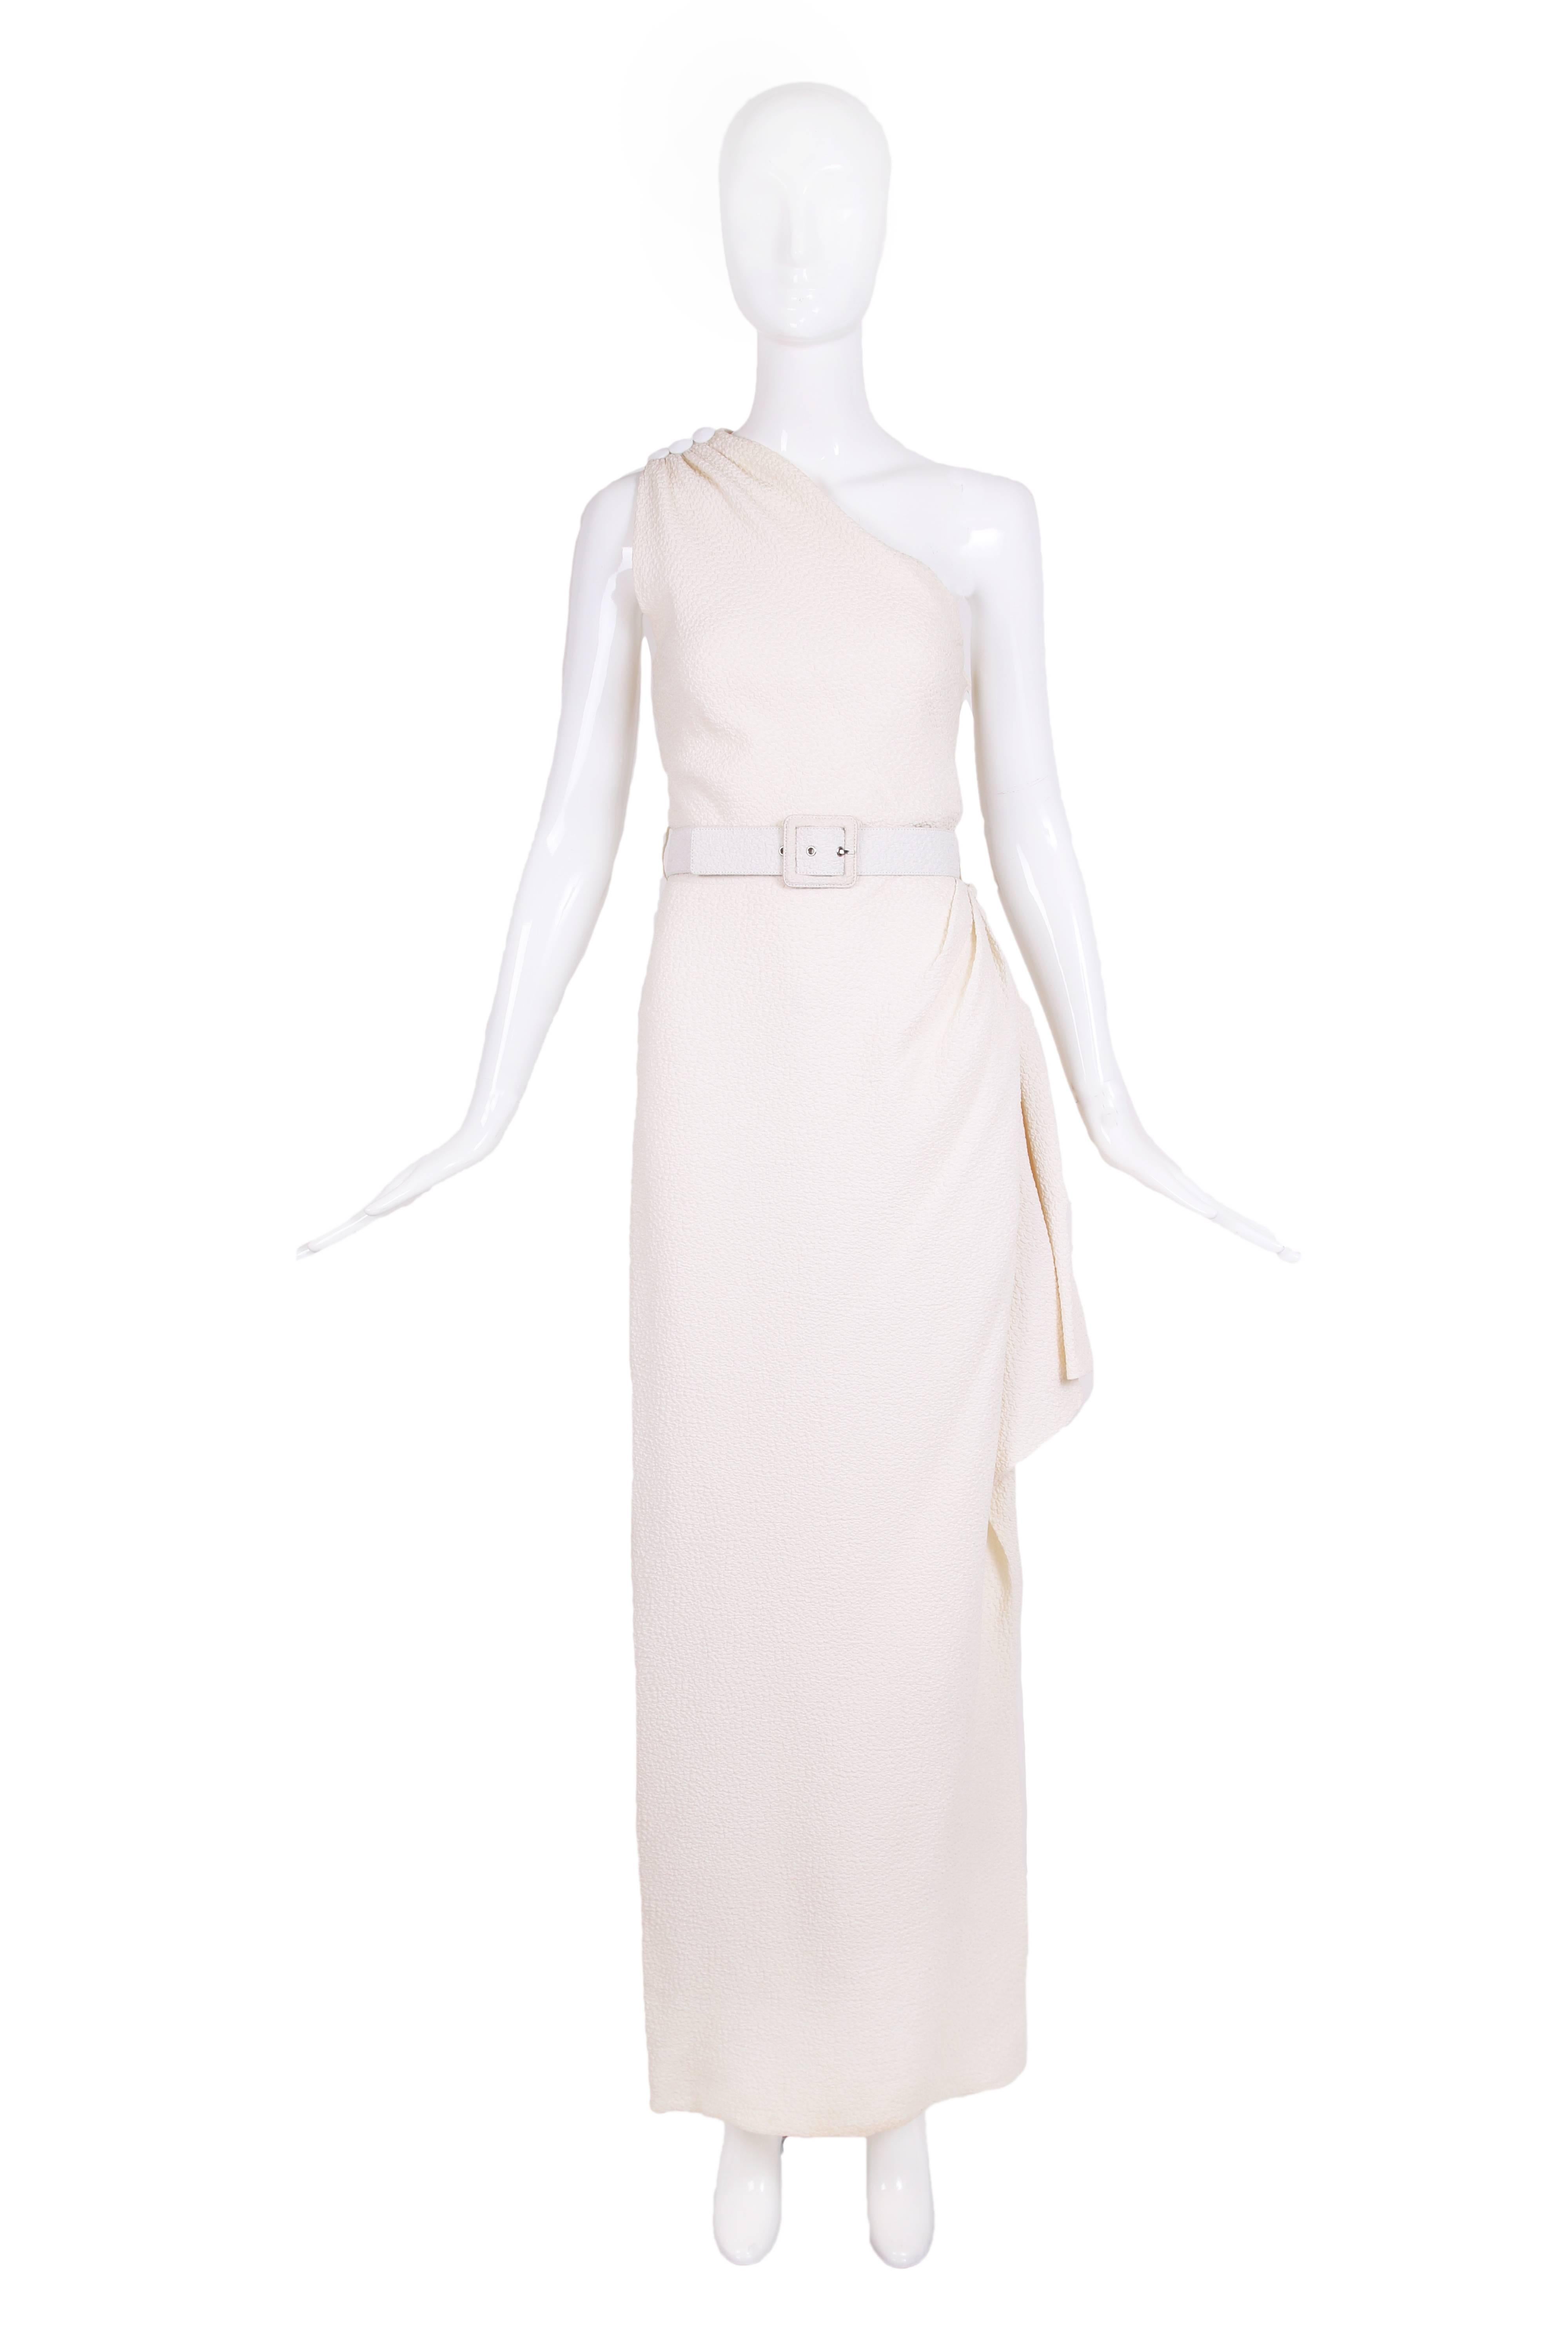 Vintage Yves Saint Laurent ivory puckered silk single shoulder gown with side ruffle detail, thigh-high slit and belt. Size 40. In very good condition with two chips at the center button of the shoulder closure.
MEASUREMENTS:
Bust - 36